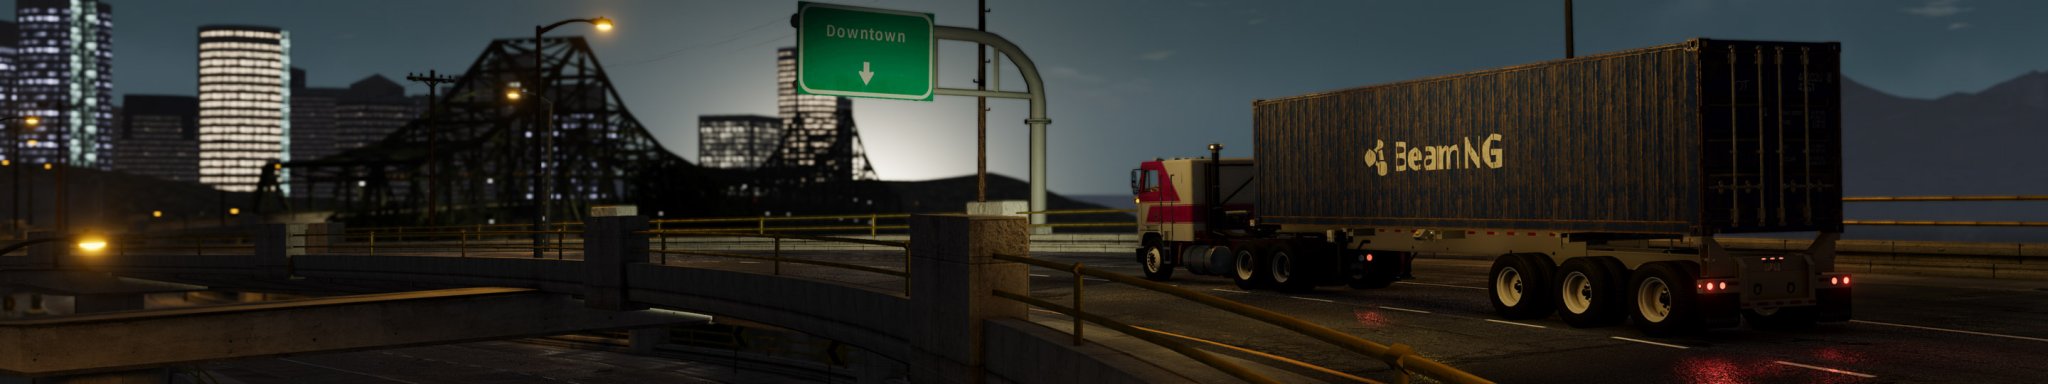 1 BeamNG FAIRHAVEN Gavril T SERIES delivery to PLAZA HOTEL copy.jpg